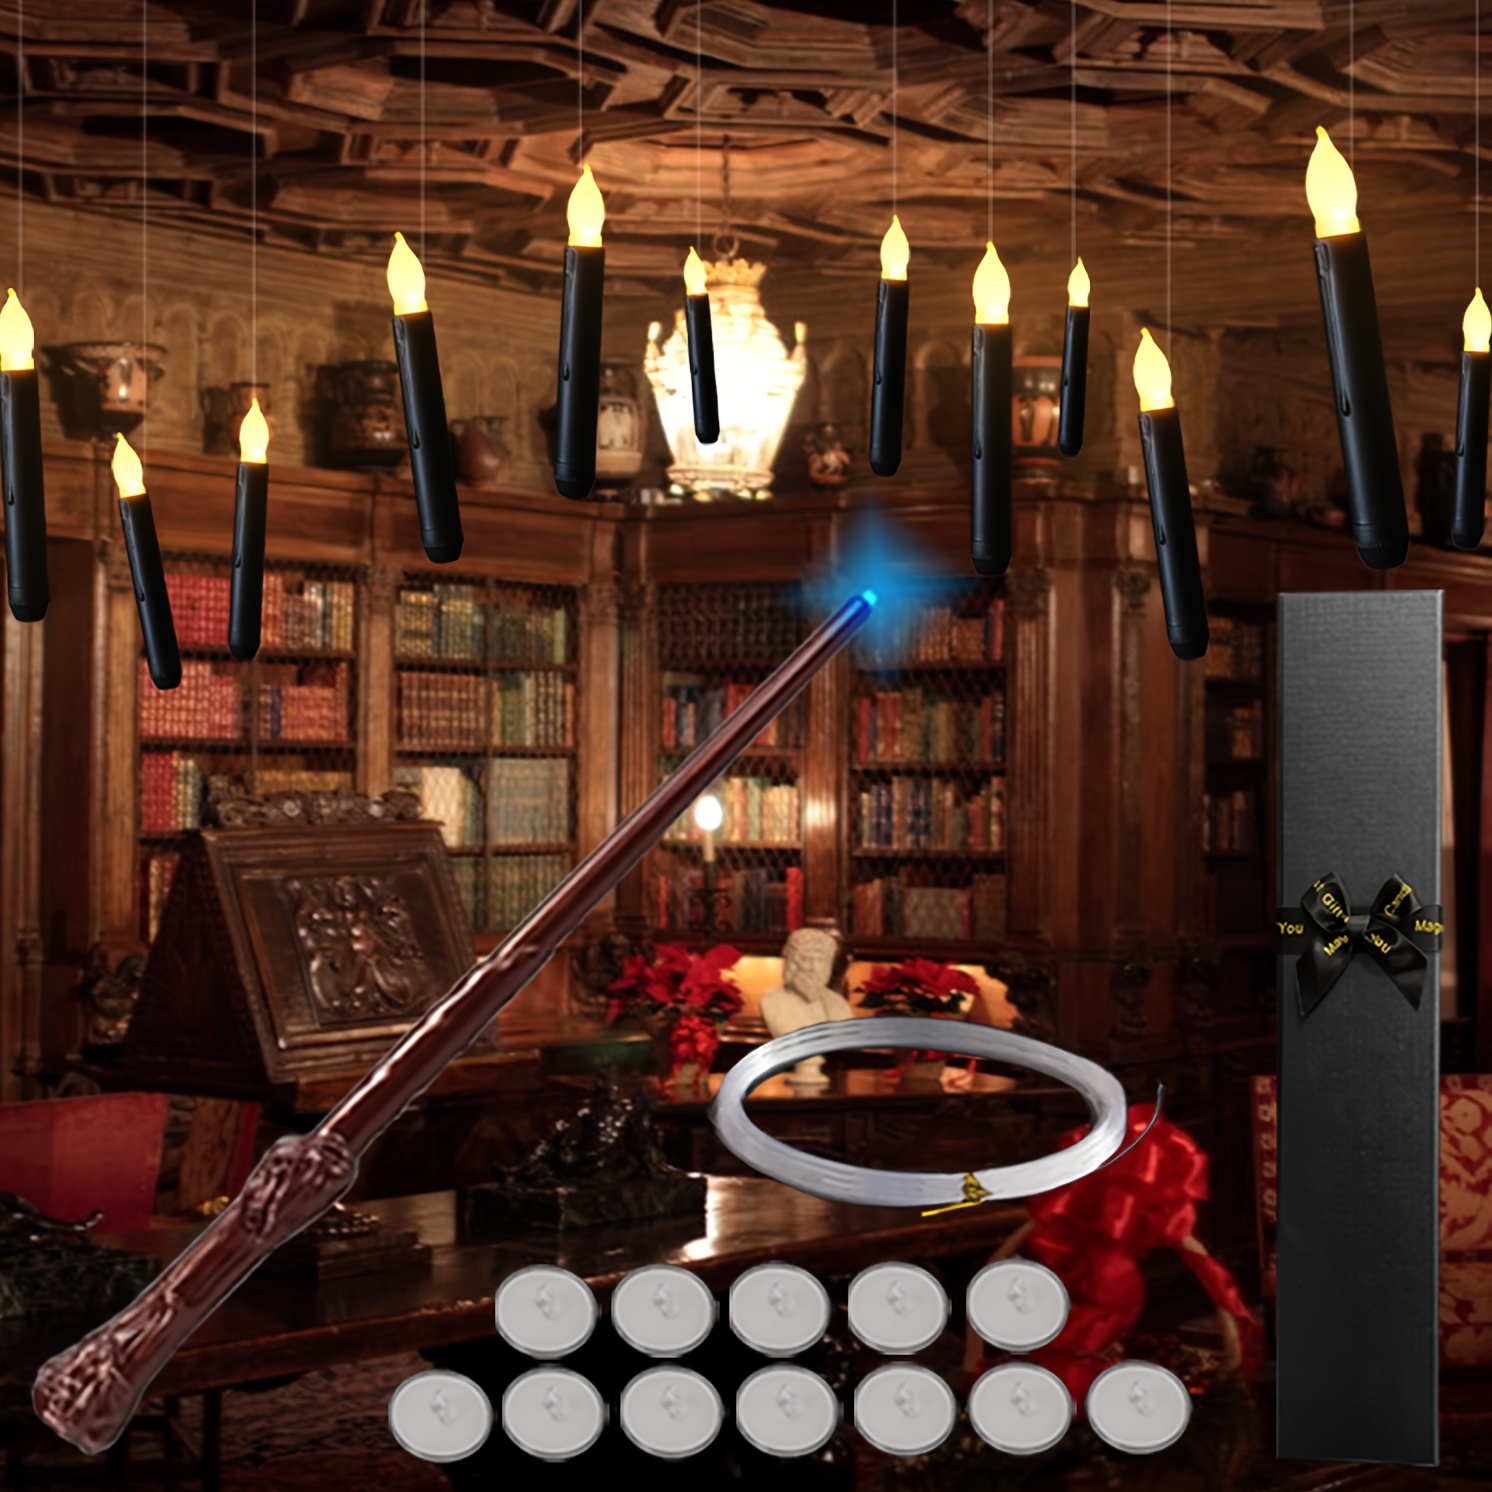 Flameless Candles With Magic Wand Remote For Halloween Decor, 6.6 Floating  Candles Battery Operated Hanging Window Candles, Flickering Electric LED